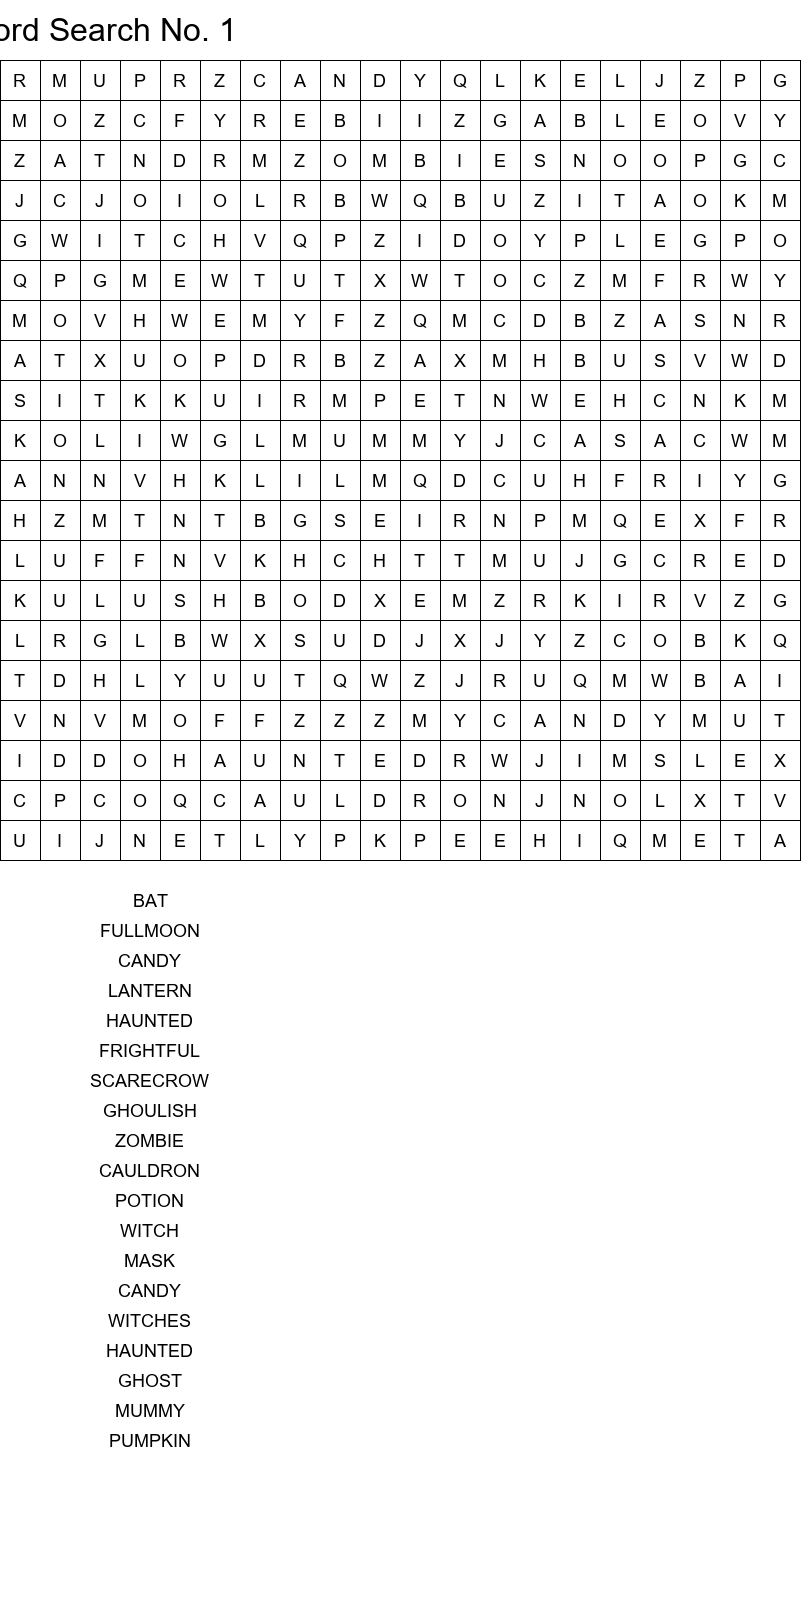 Top 20x20 Halloween word search with answers size 20x20 No 1